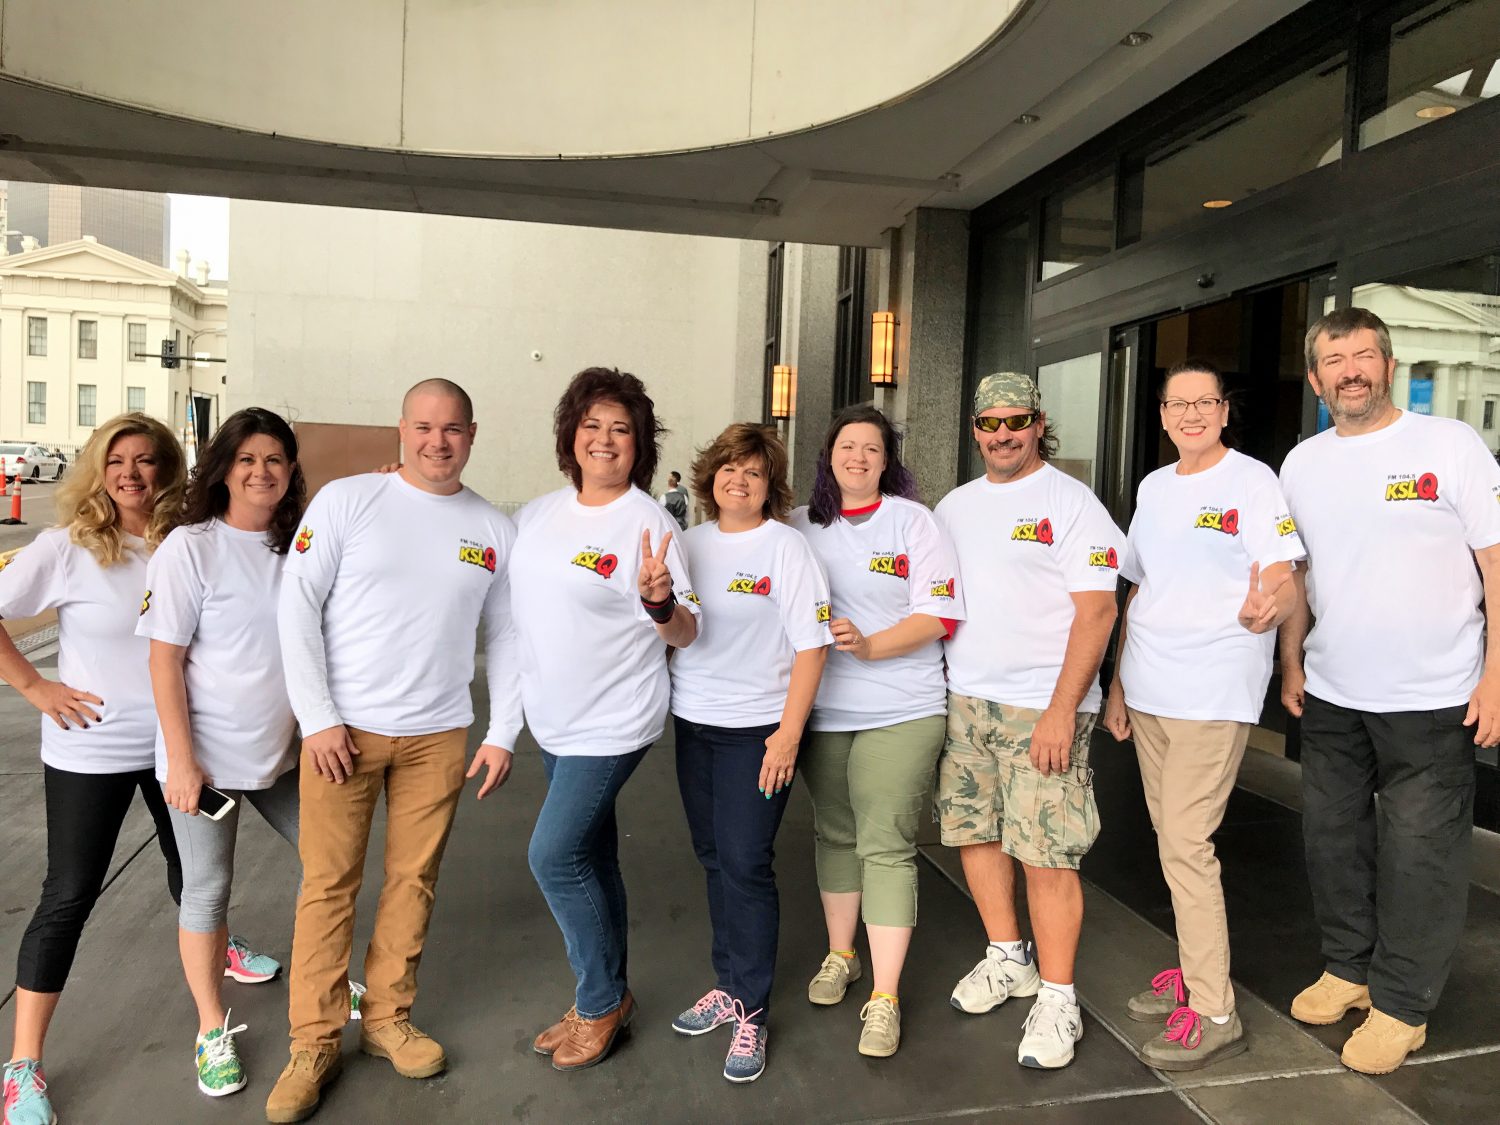 KSLQ Over The Edge Team Raises Most Money for Special Olympics